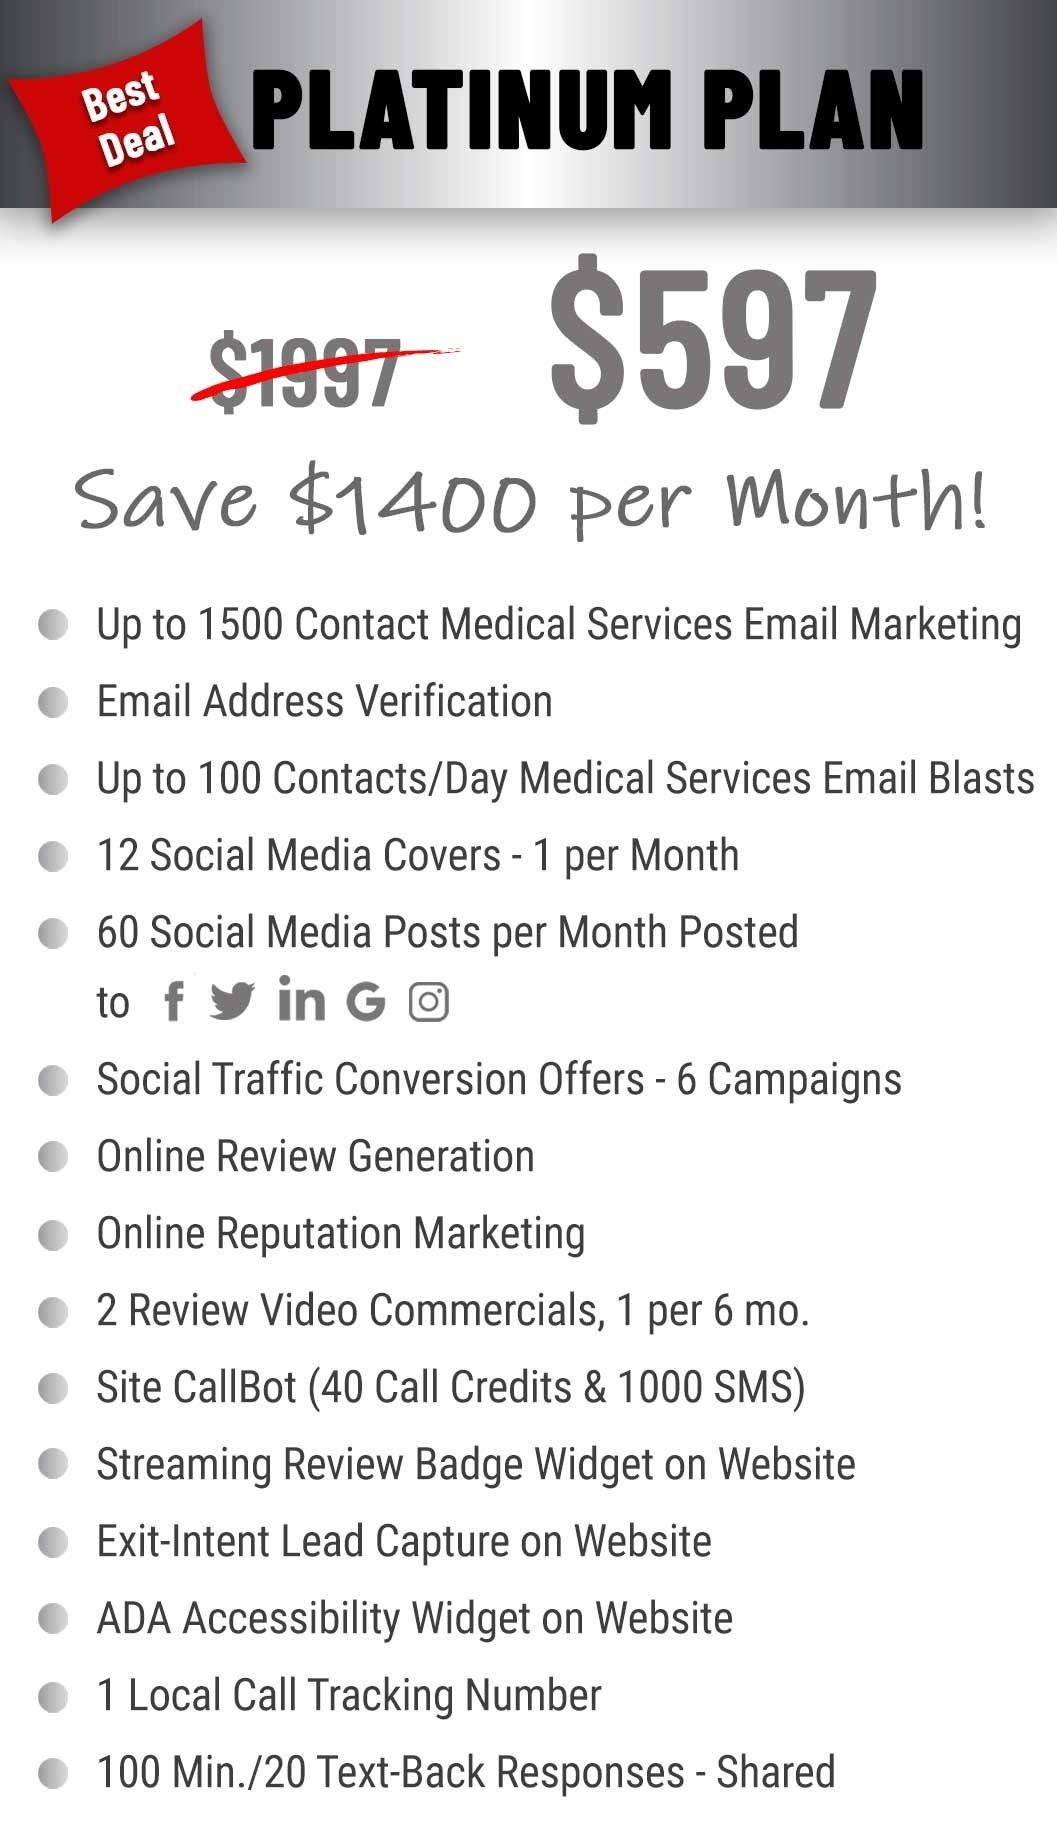 platinum plan $597 per month pricing and features for medical services.